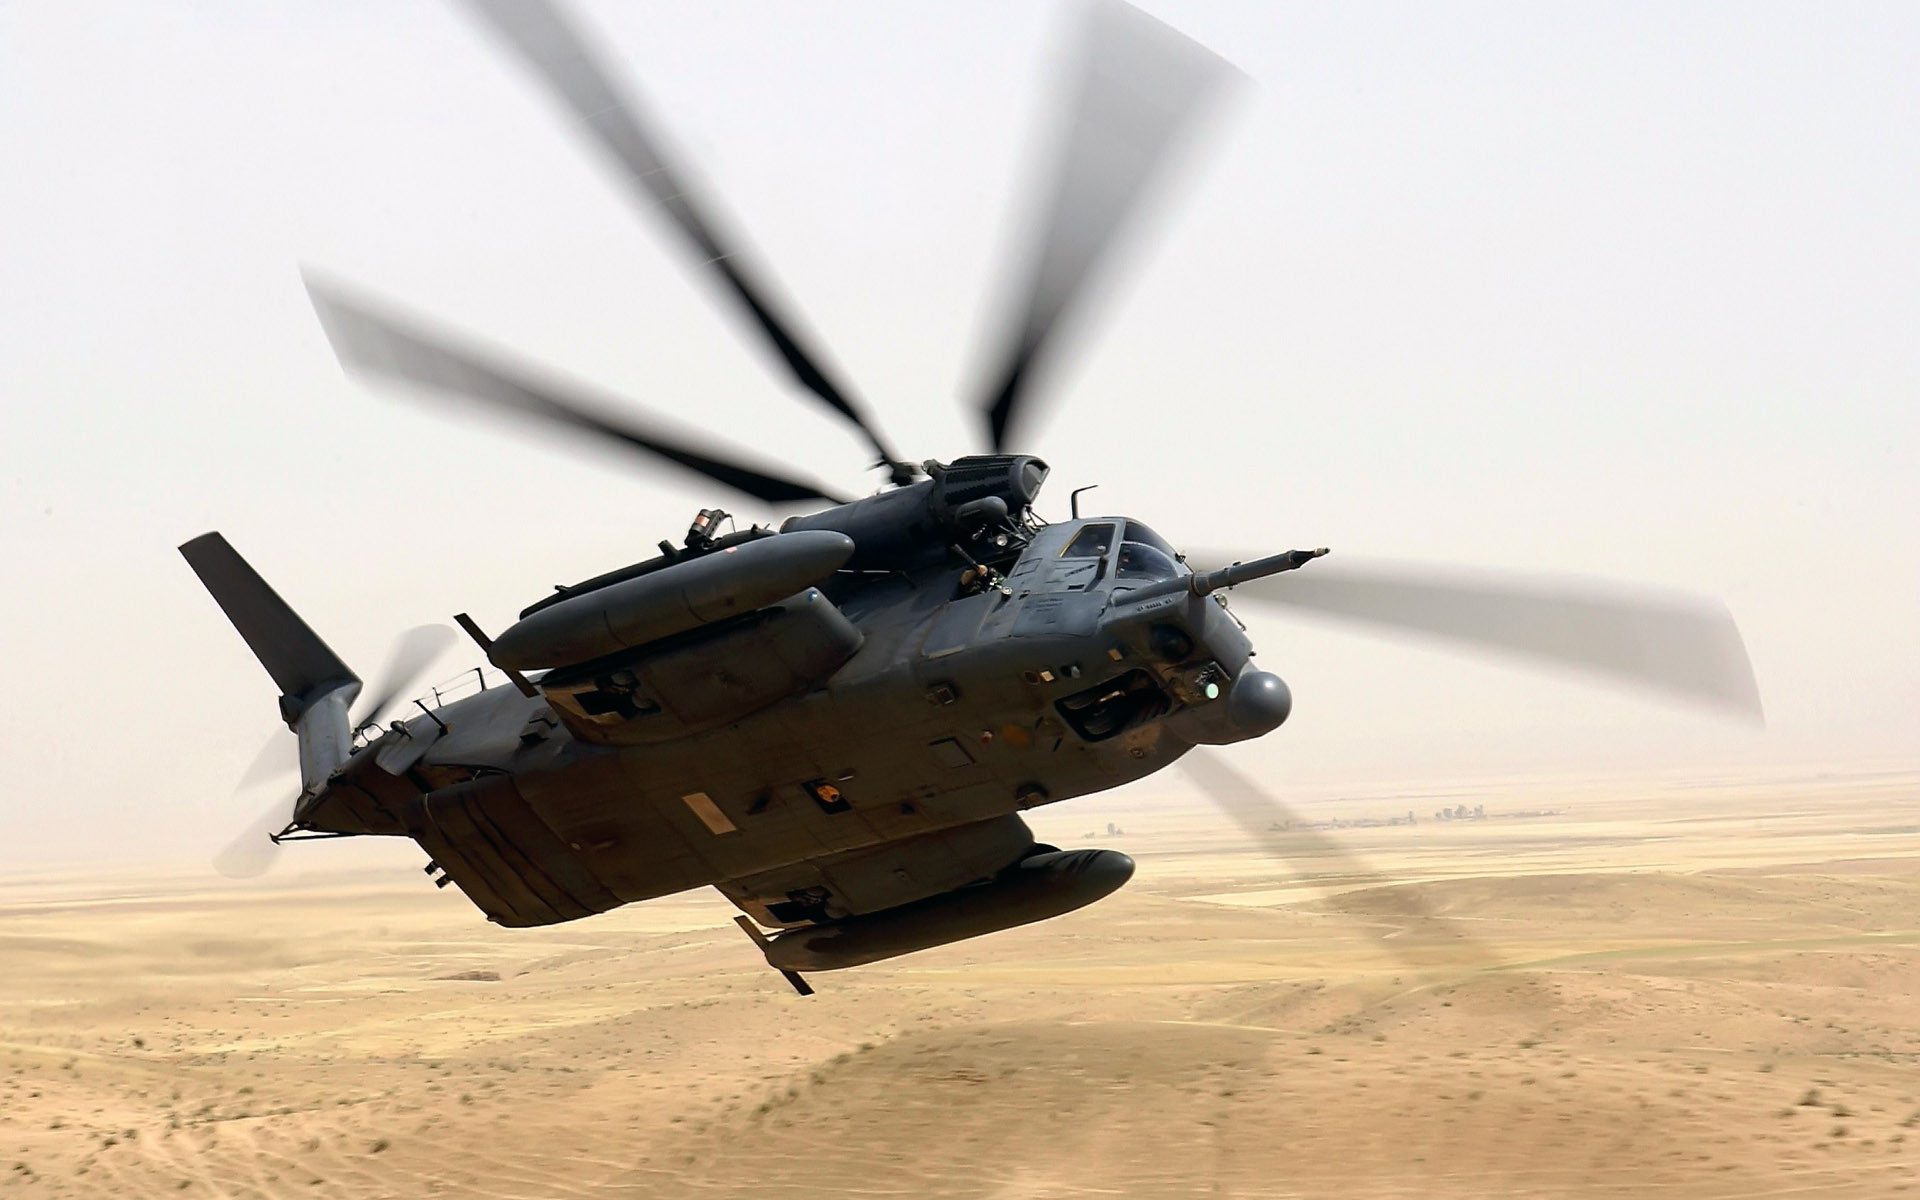 US Air Force USAF MH 53M Pave Low IV Helicopter Wallpapers HD 1920x1200